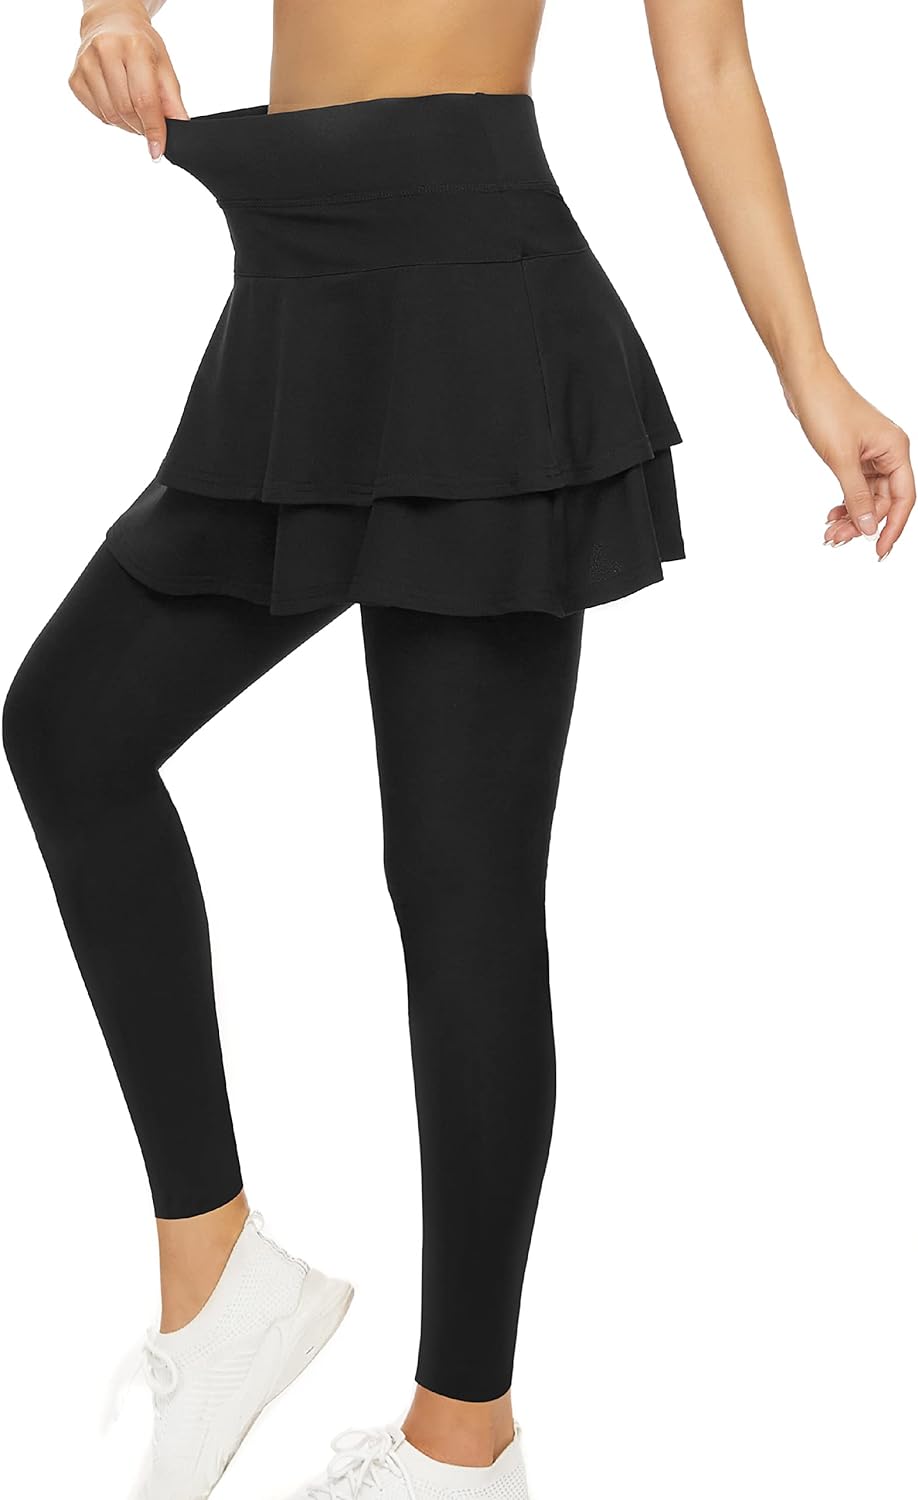 Westkun Women Leggings with Skirt Attached Tennis India | Ubuy